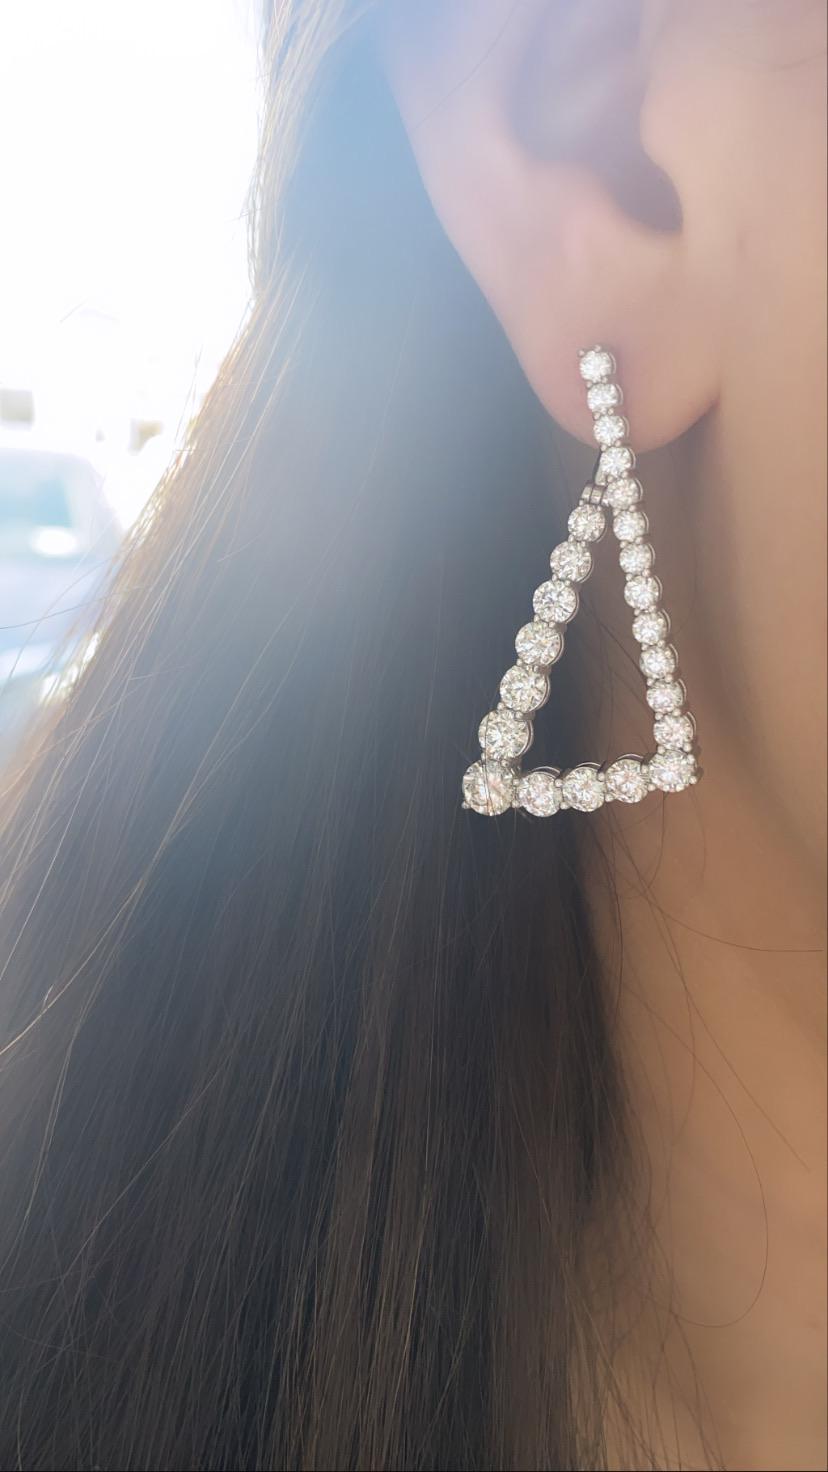 This diamond earring is a modern twist to the typical diamond hanging earrings. It has an edgy asymmetry vibe bringing out today's modern unique look. It is the perfect statement piece. 
This piece can also be custom made in any color sapphire and